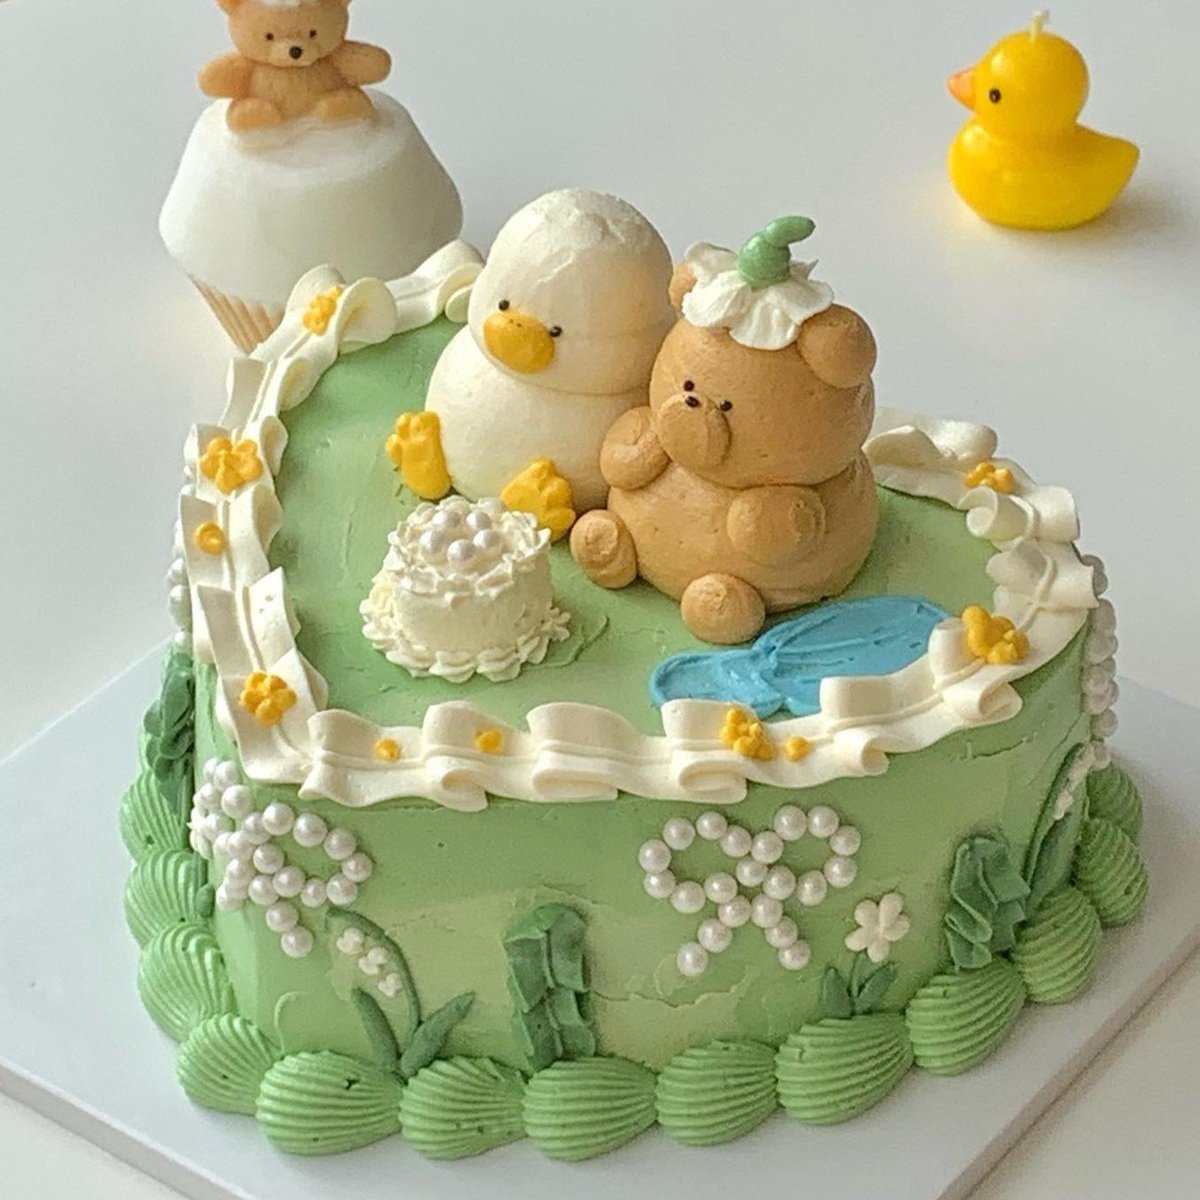 Duck and teddy bear cake made by _creamdiary